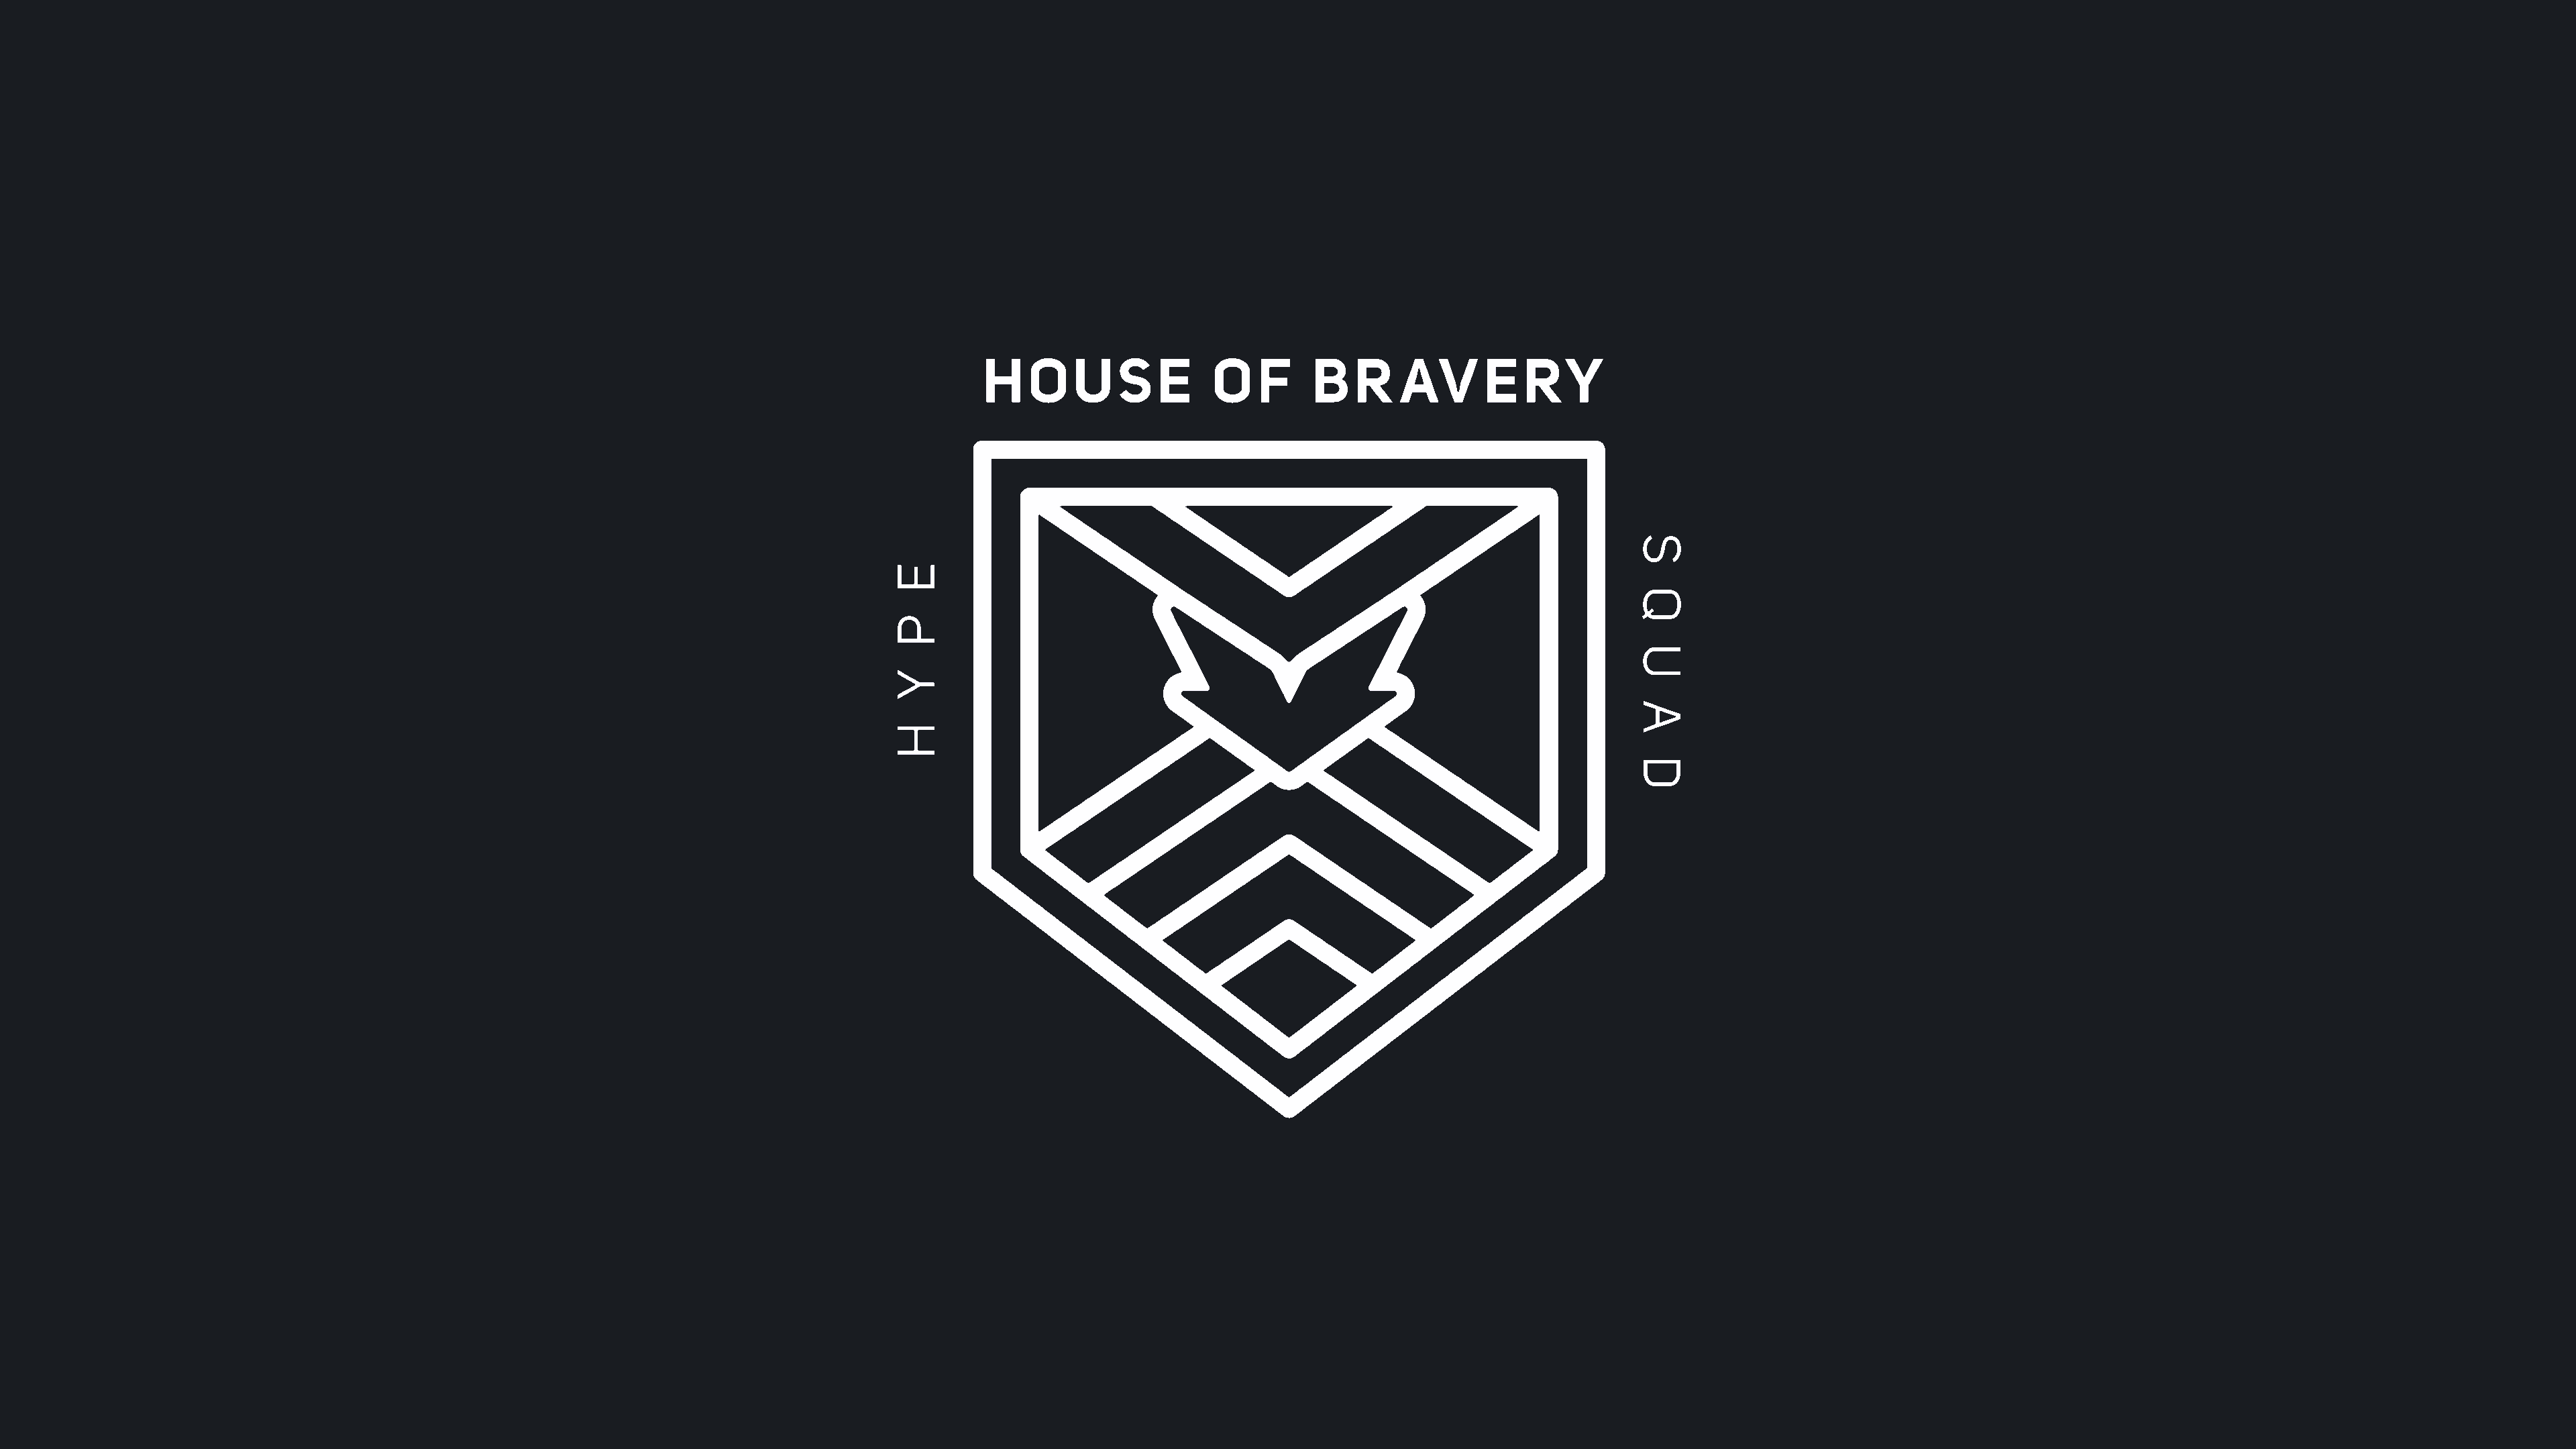 Discord HypeSquad & House of Bravery Wallpapers